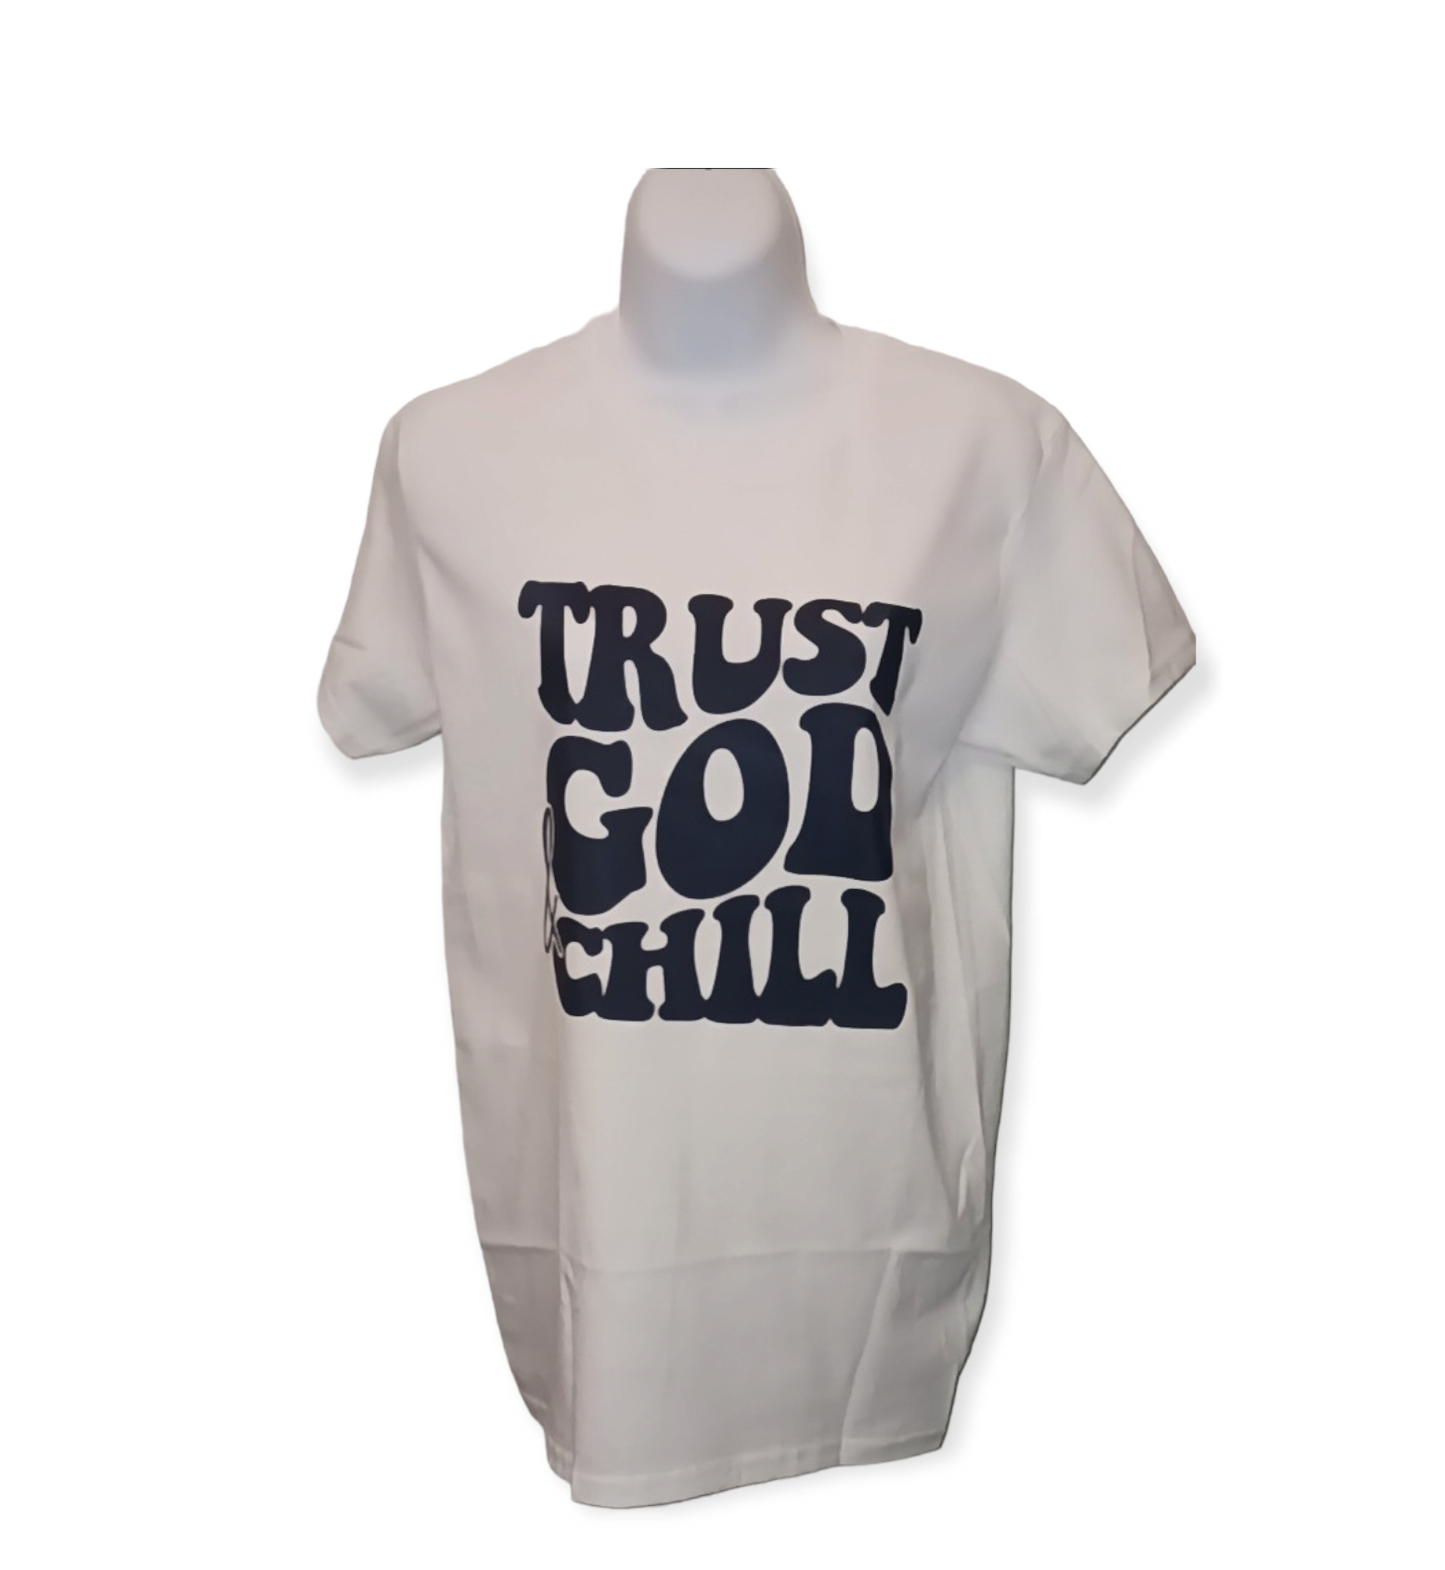 Trust God and Chill T-Shirt